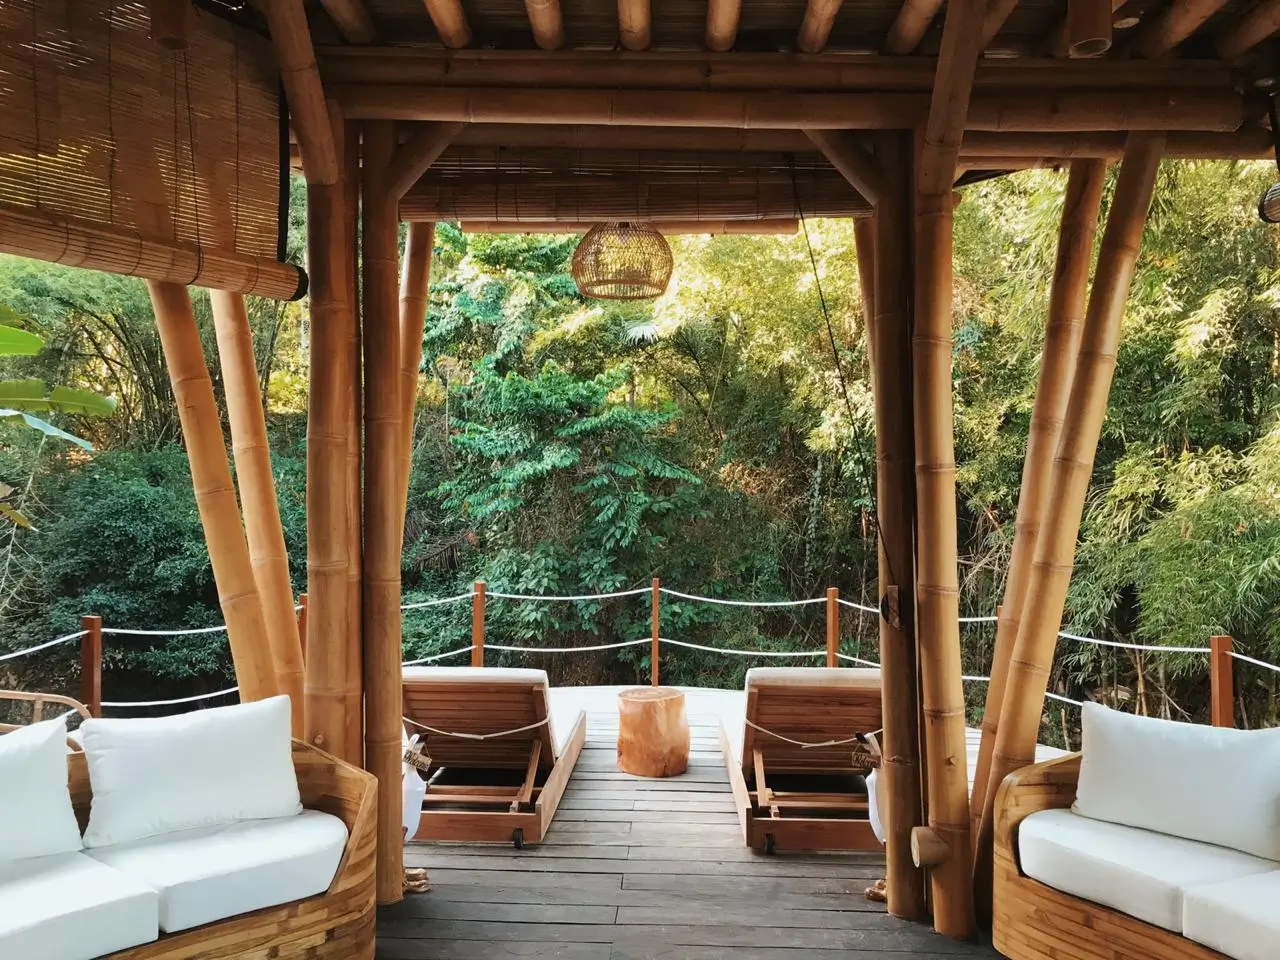 Bamboo relaxation deck with plush seating overlooking a tranquil forest at Sun Sang Eco Healing Retreats in Bali